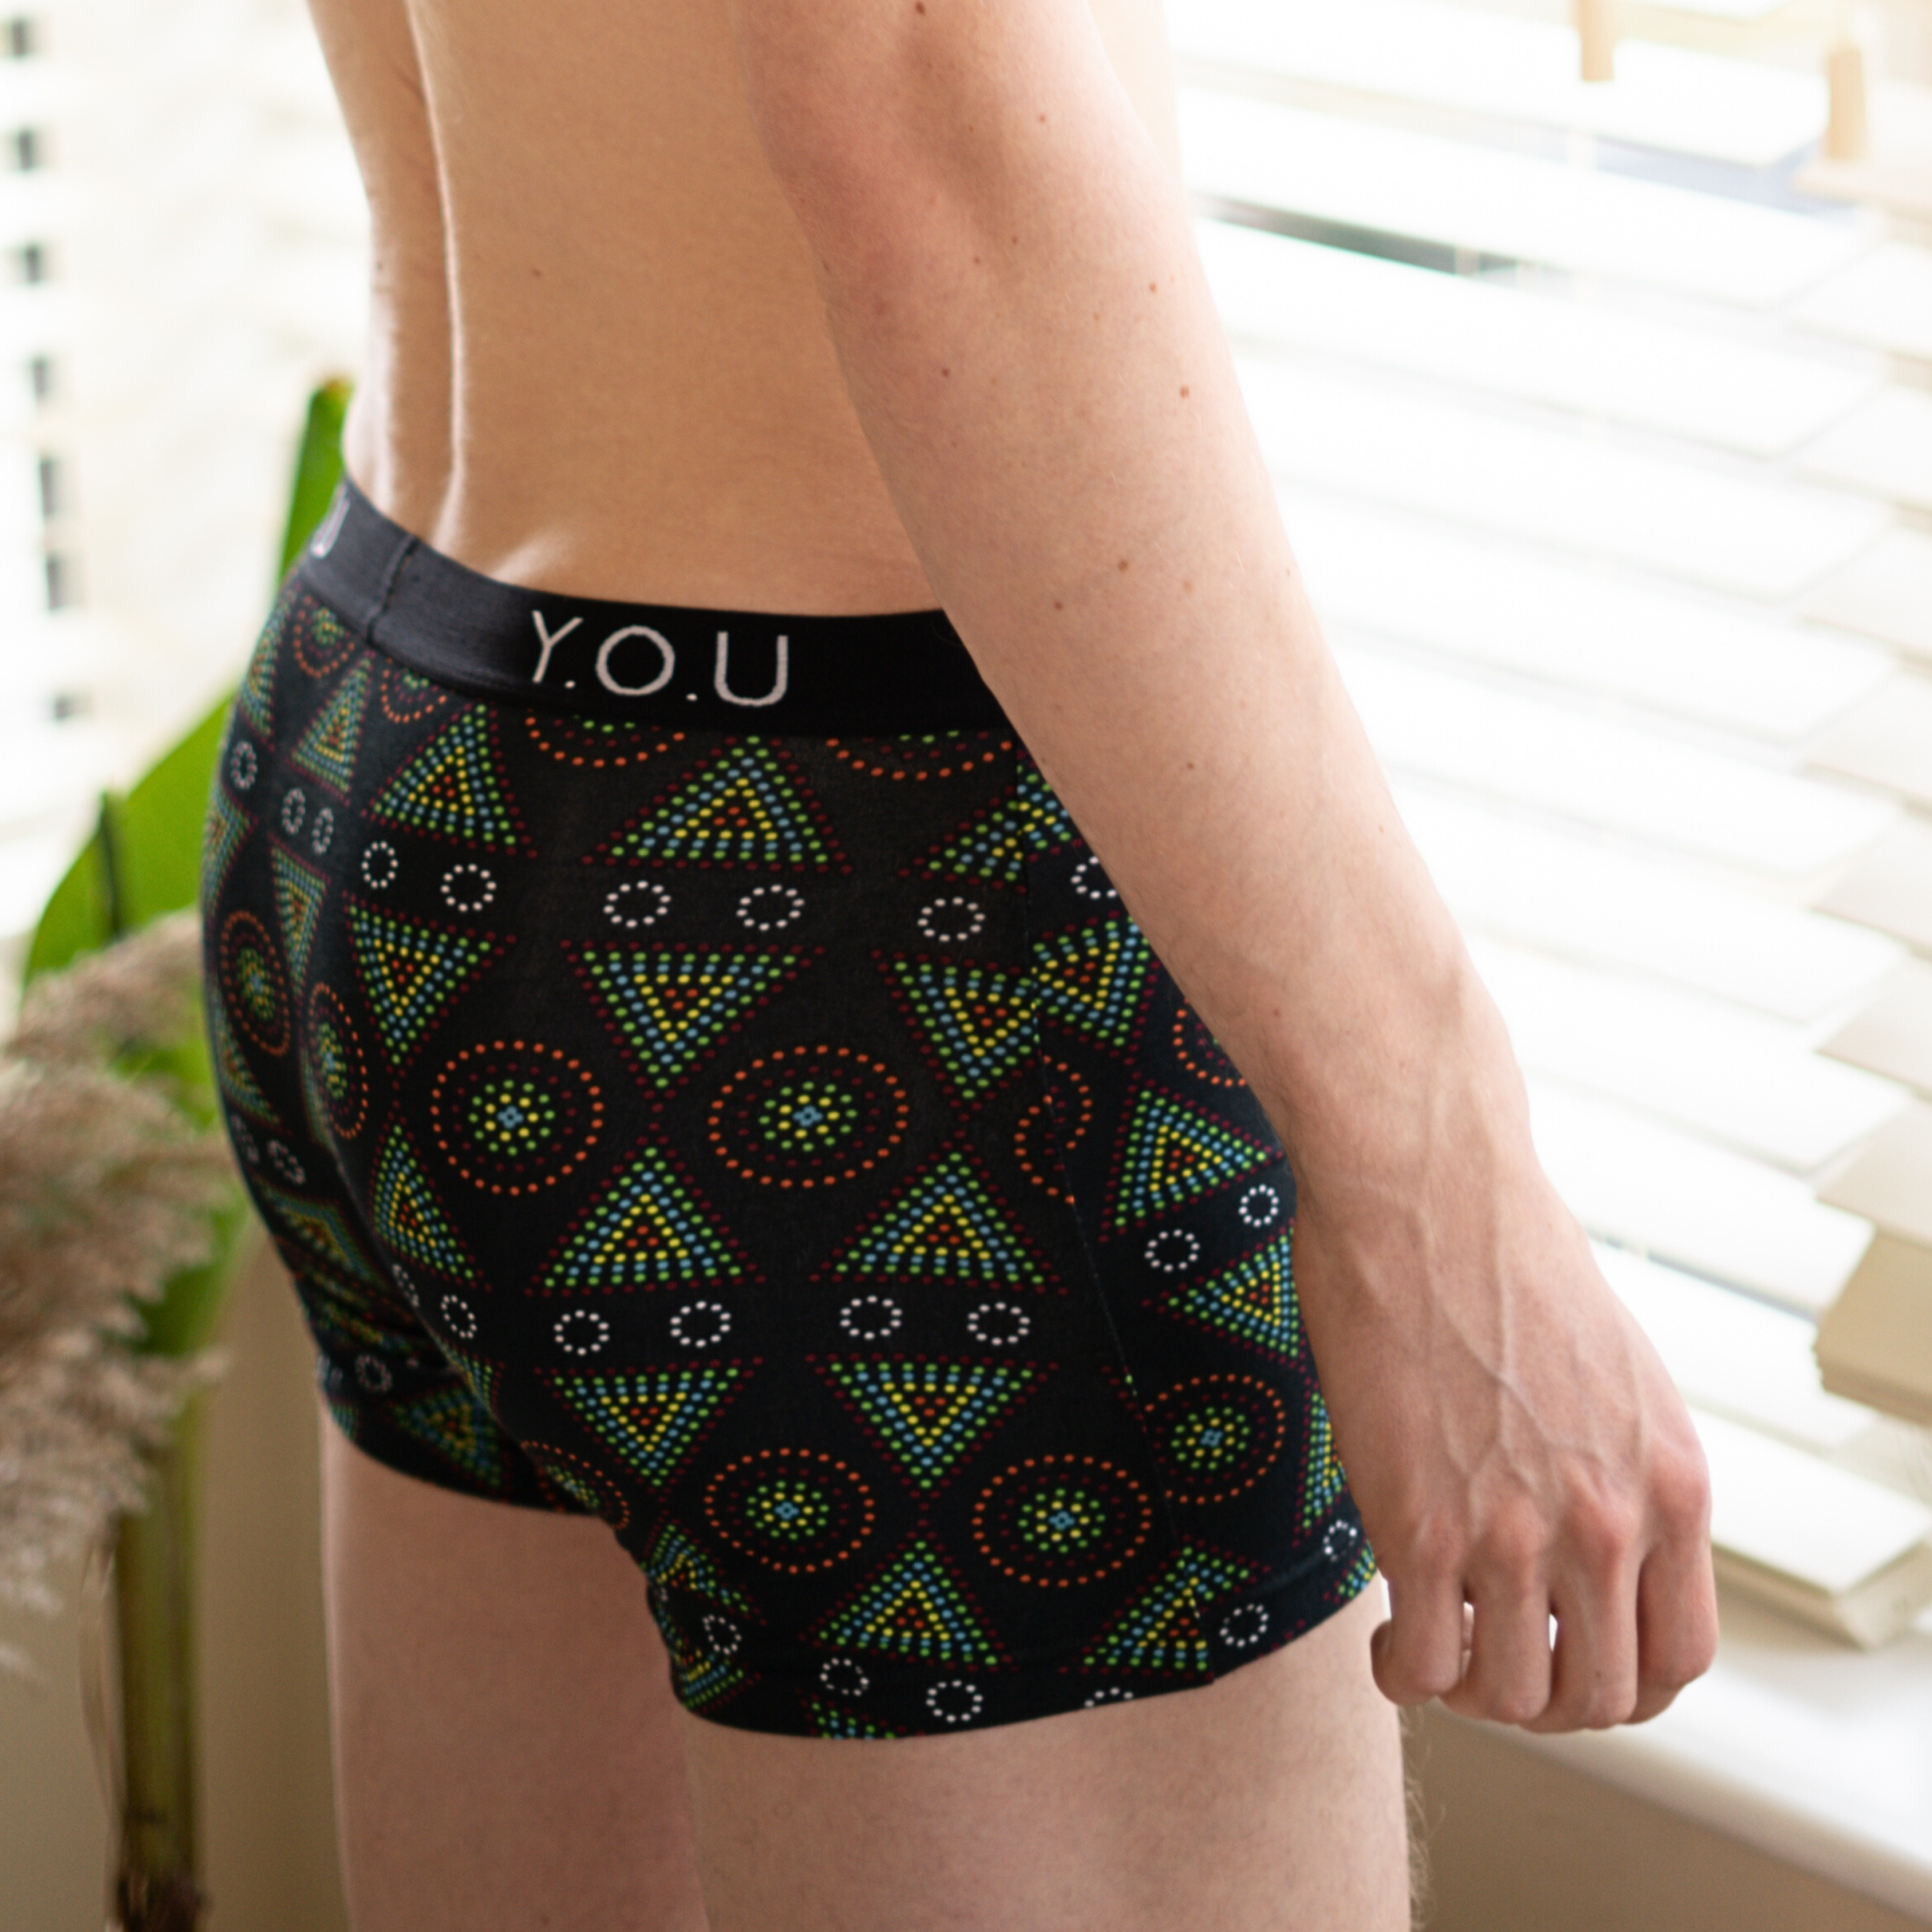 A person wearing black hipster trunks with a colorful geometric pattern stands near a window with white blinds. The waistband of the underwear displays the initials "Y.O.U." in white. Plants are partially visible in the background.